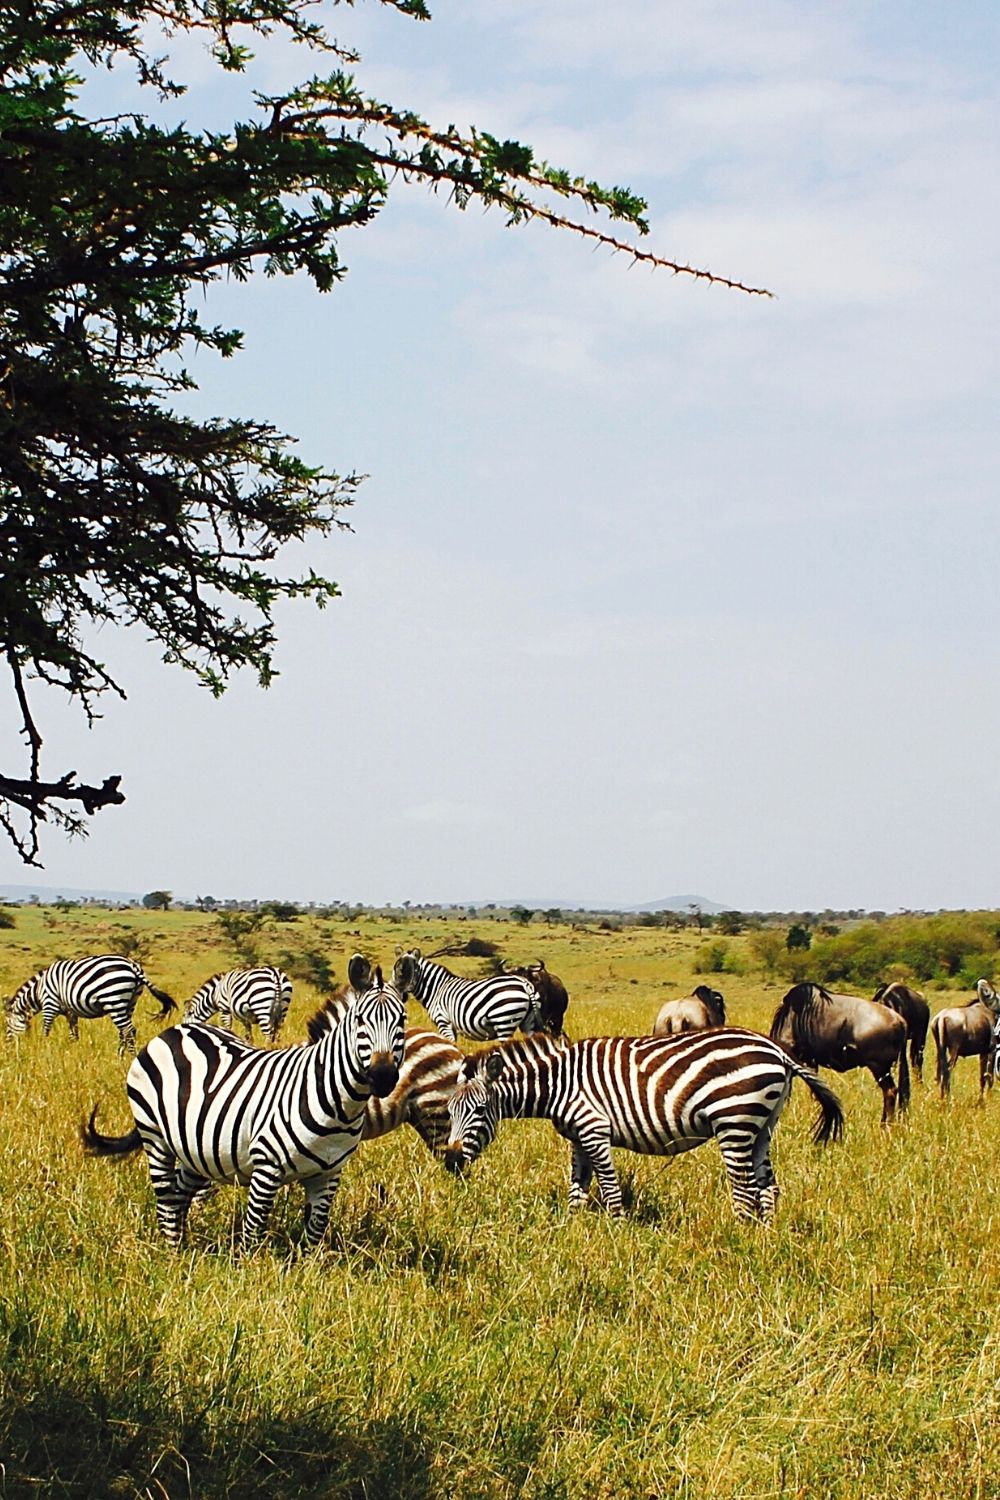 One reason why zebras attack their newborns is that they need to maintain herd quality and genetics